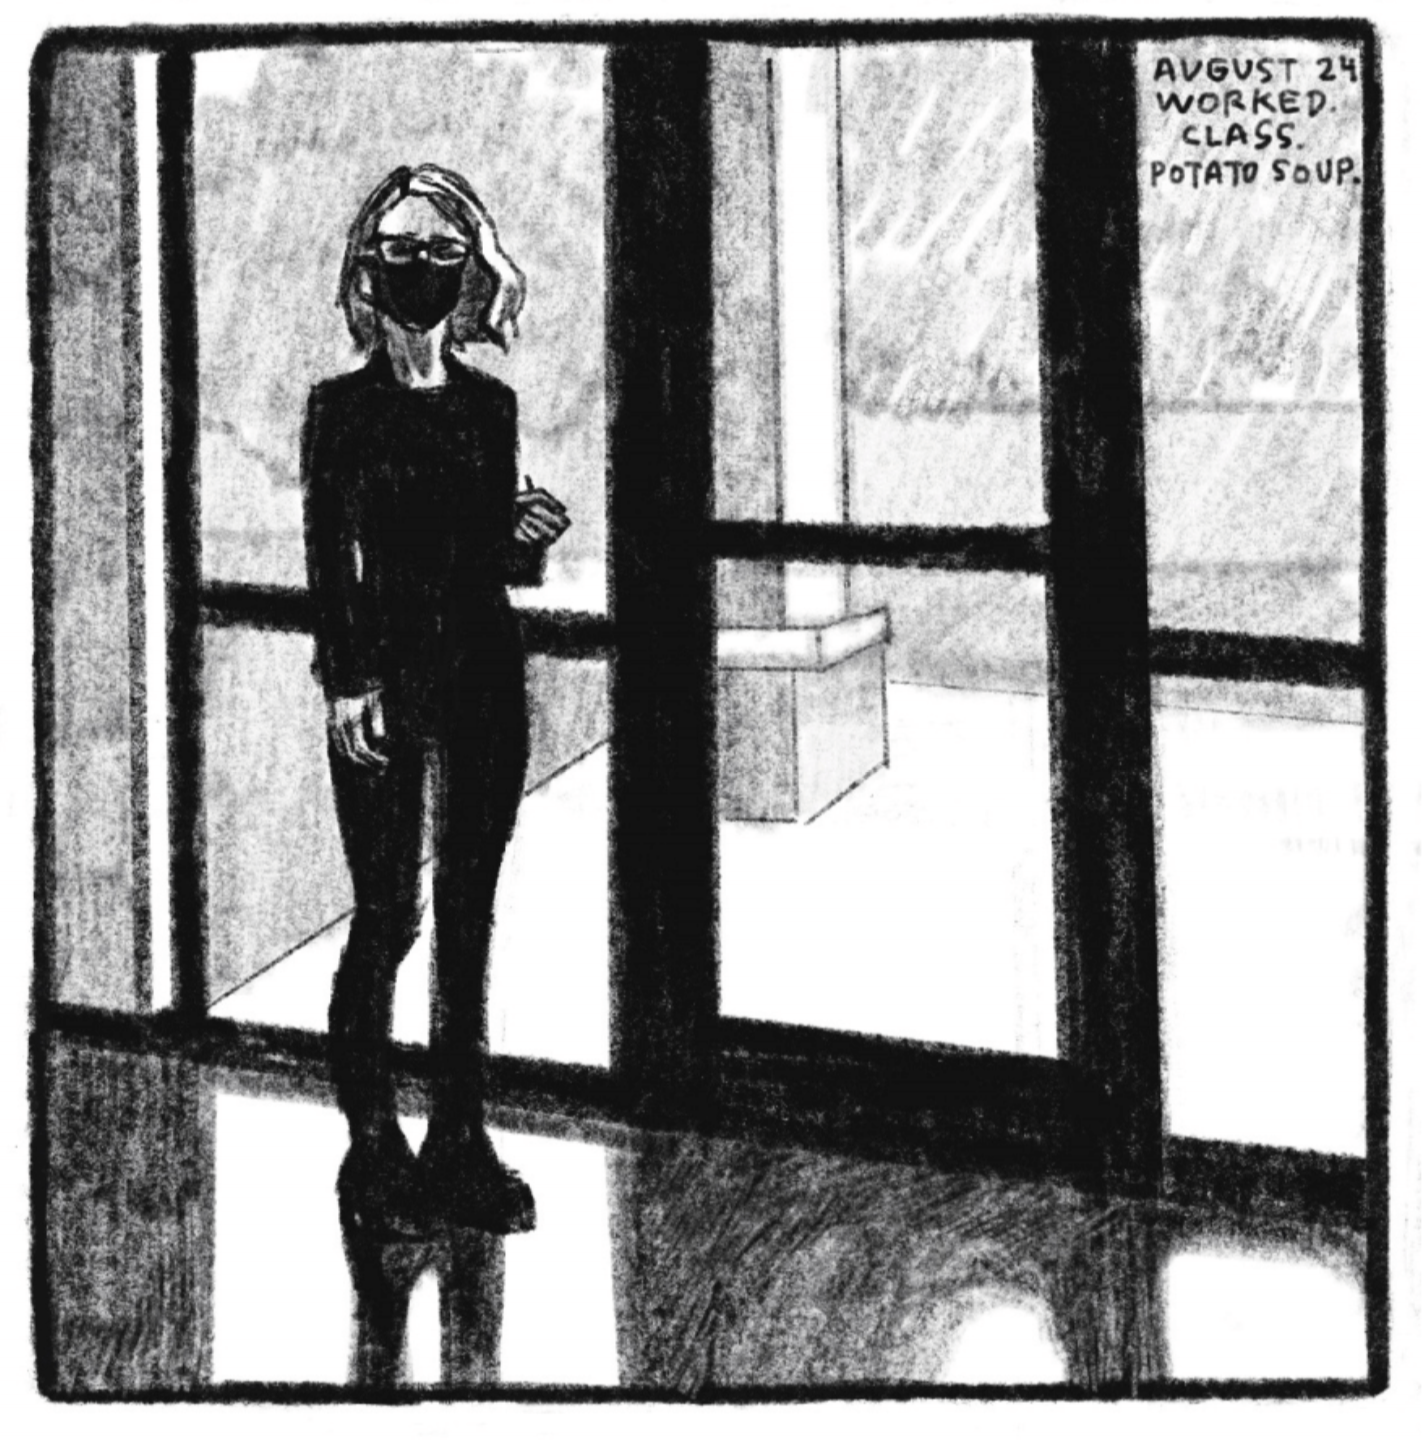 Kim stands inside a room with a reflective floor, in front of a wall of windows. She is wearing an all-black outfit, including a black covid mask, along with her glasses. She is holding something, maybe an apple, in her hand, and looking right at the reader. Through the window, we see some kind of concrete pillar or pole. â€œAugust 24. Worked. Class. Potato soup.â€